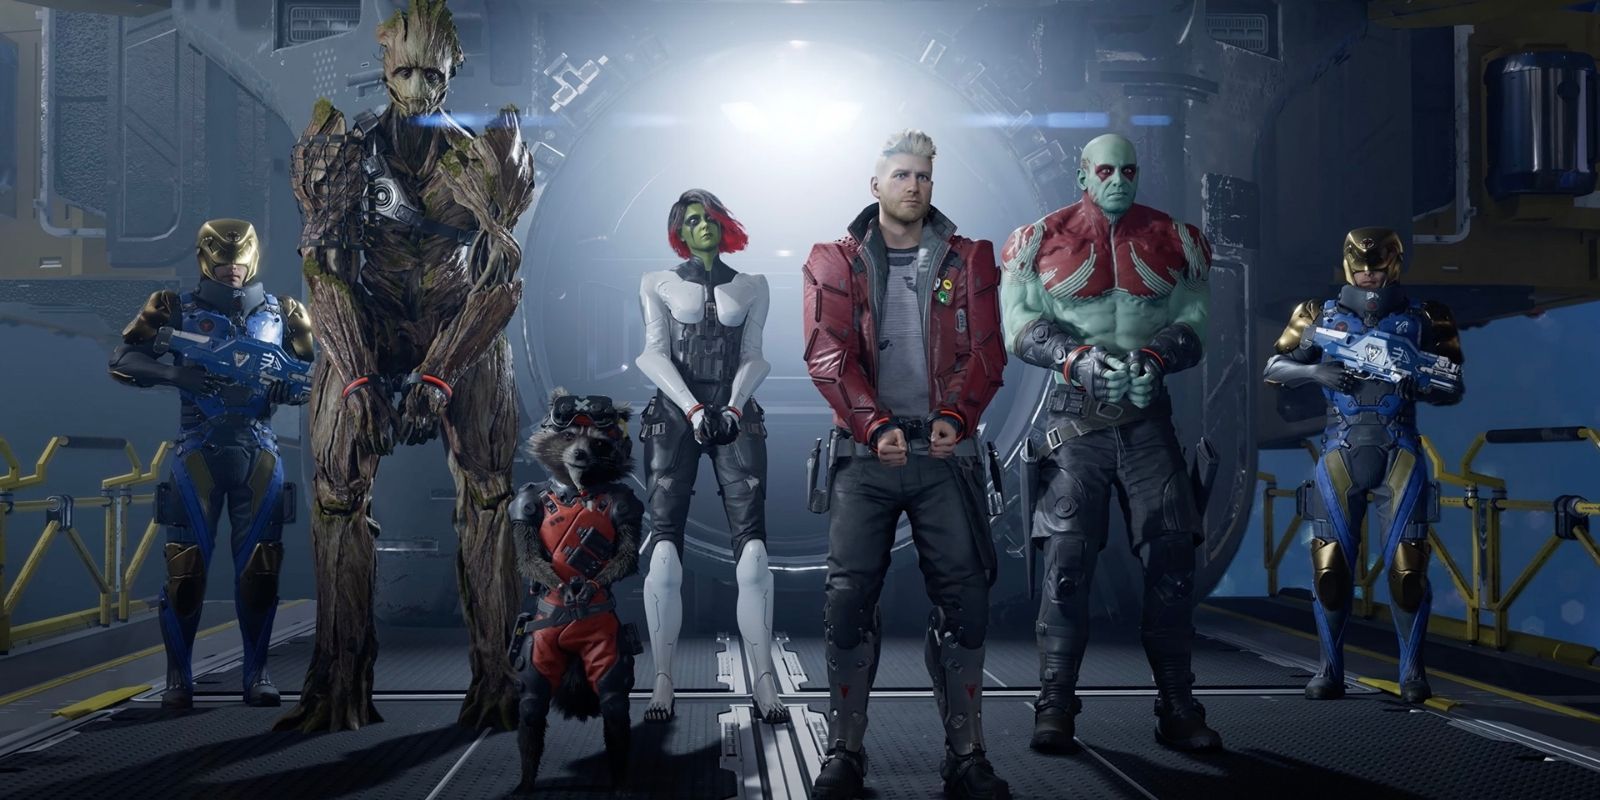 The Guardians of the Galaxy in custody in Eidos Montreal's video game